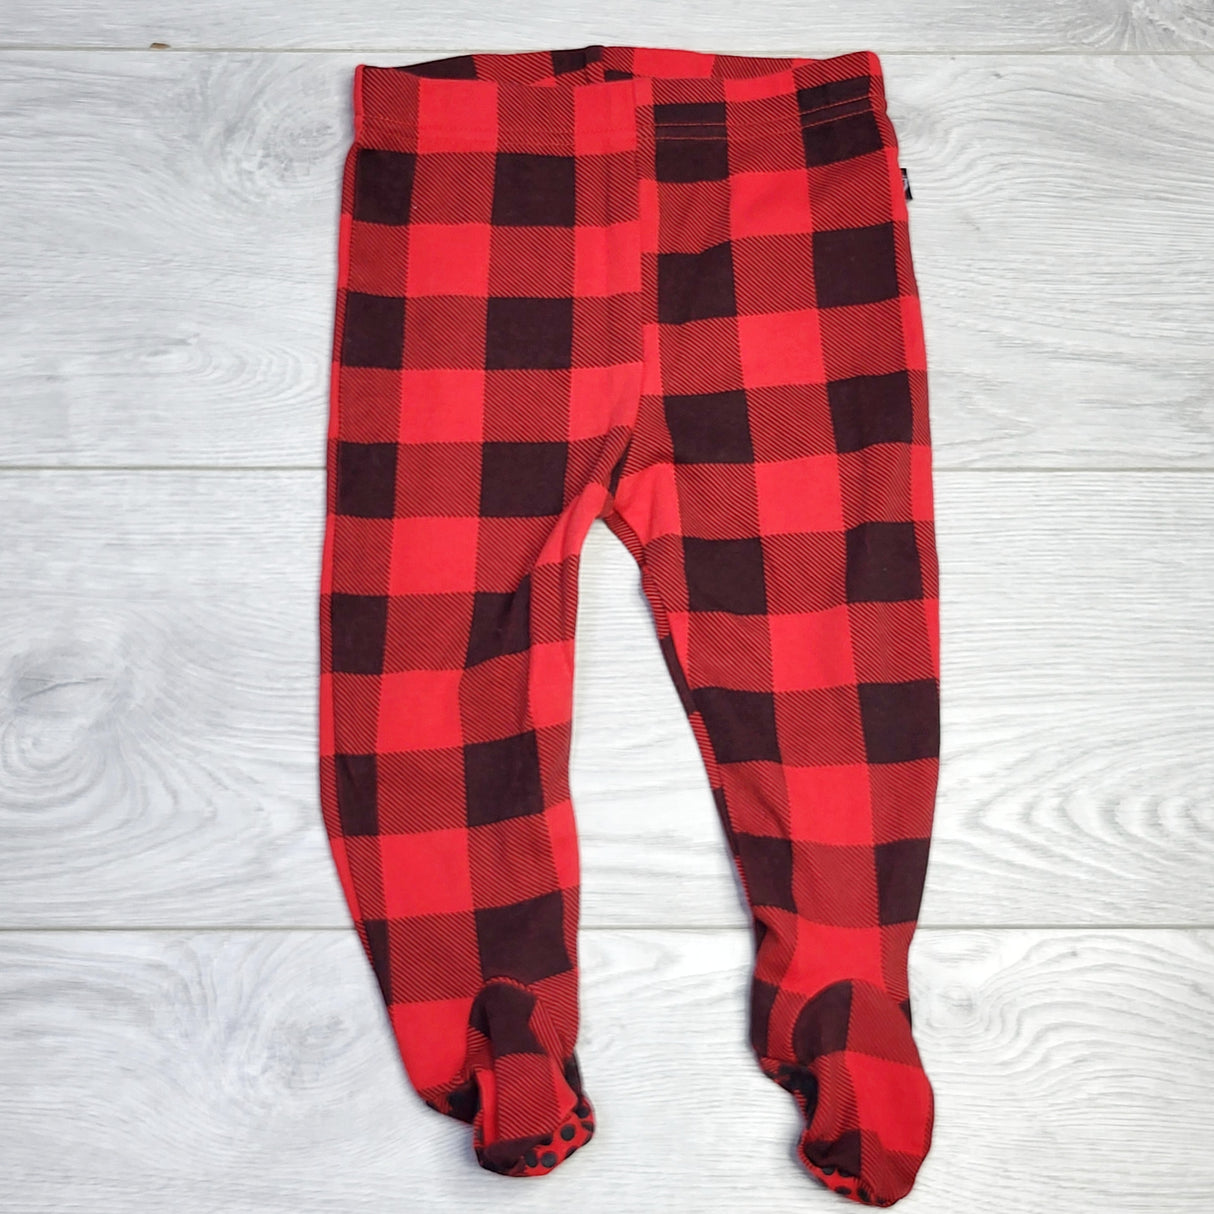 RZA2 - Mini Heroes red plaid footed cotton pants. Size 24 months